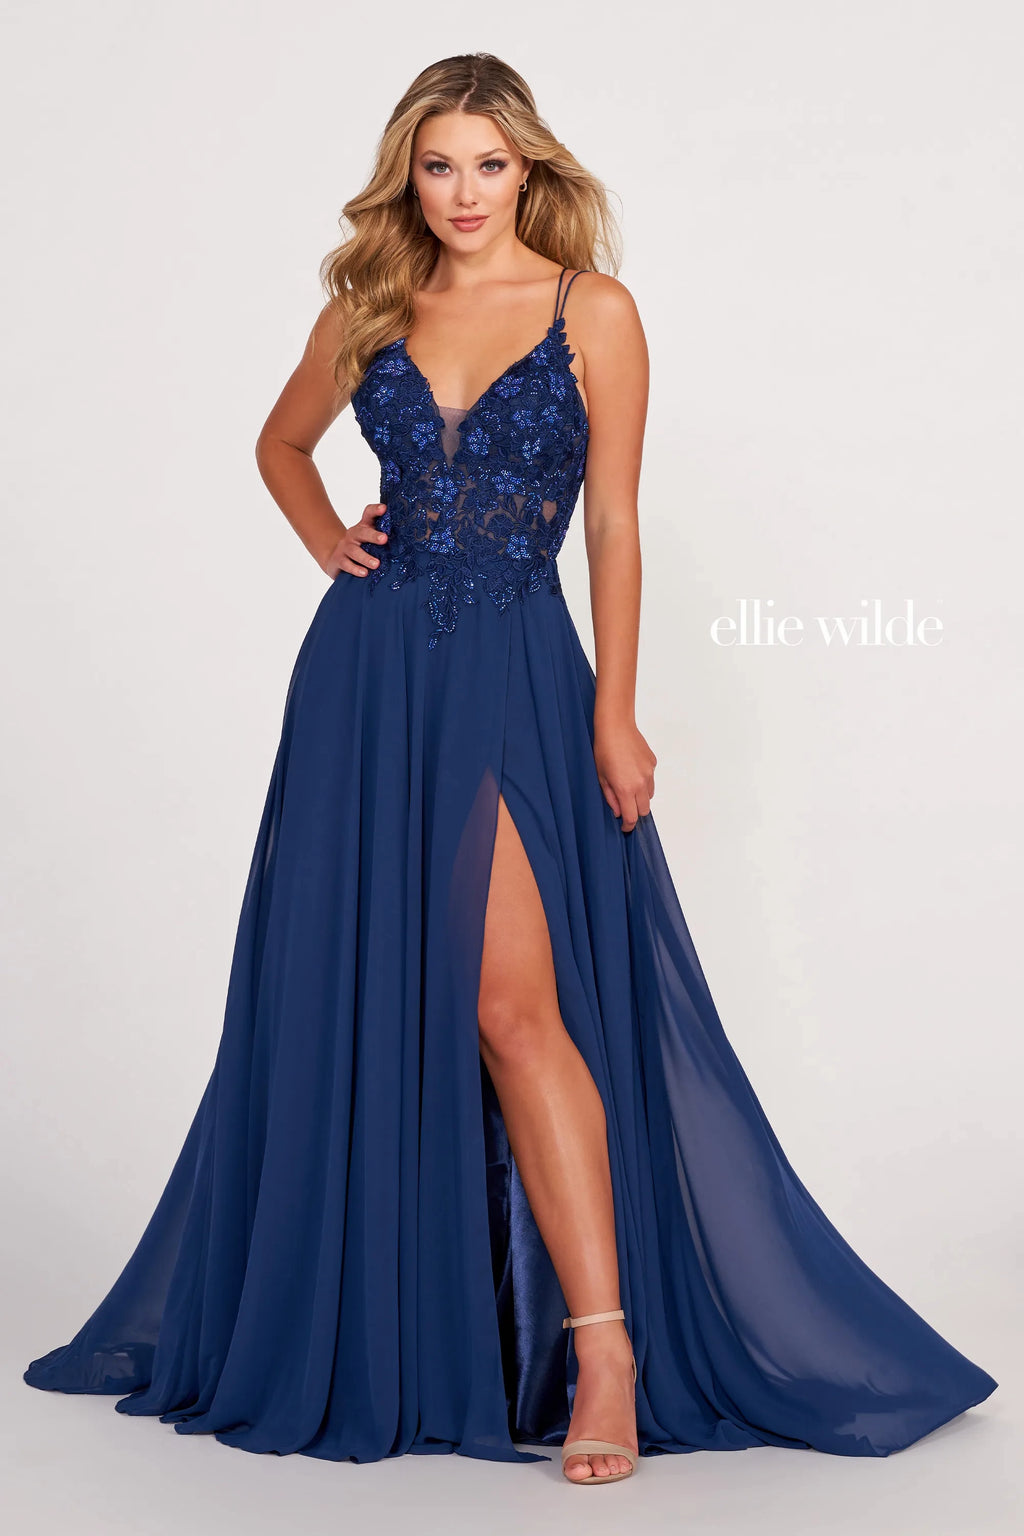 Looking for a show-stopping dress that will turn heads? Look no further than the Ellie Wilde EW34078. This gorgeous dress features intricate embroidered lace with three-dimensional flowers and stone accents. The flowing chiffon material is perfect for a night out on the town or a special event. You're sure to dazzle in this stunning dress!